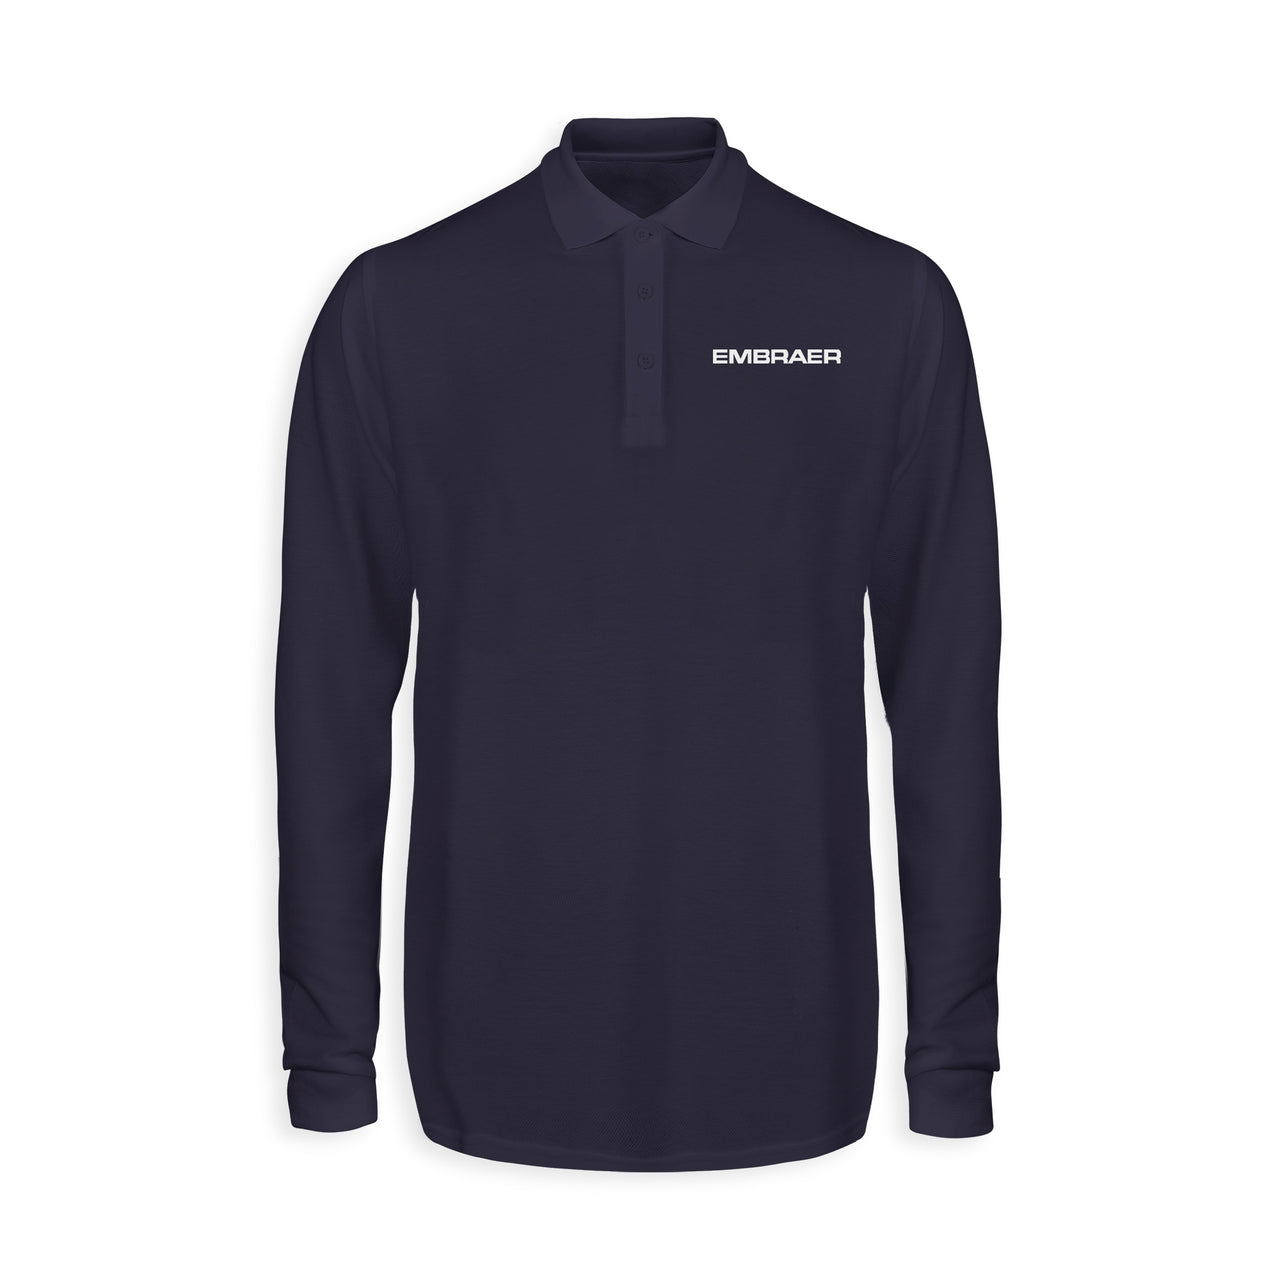 Embraer & Text Designed Long Sleeve Polo T-Shirts